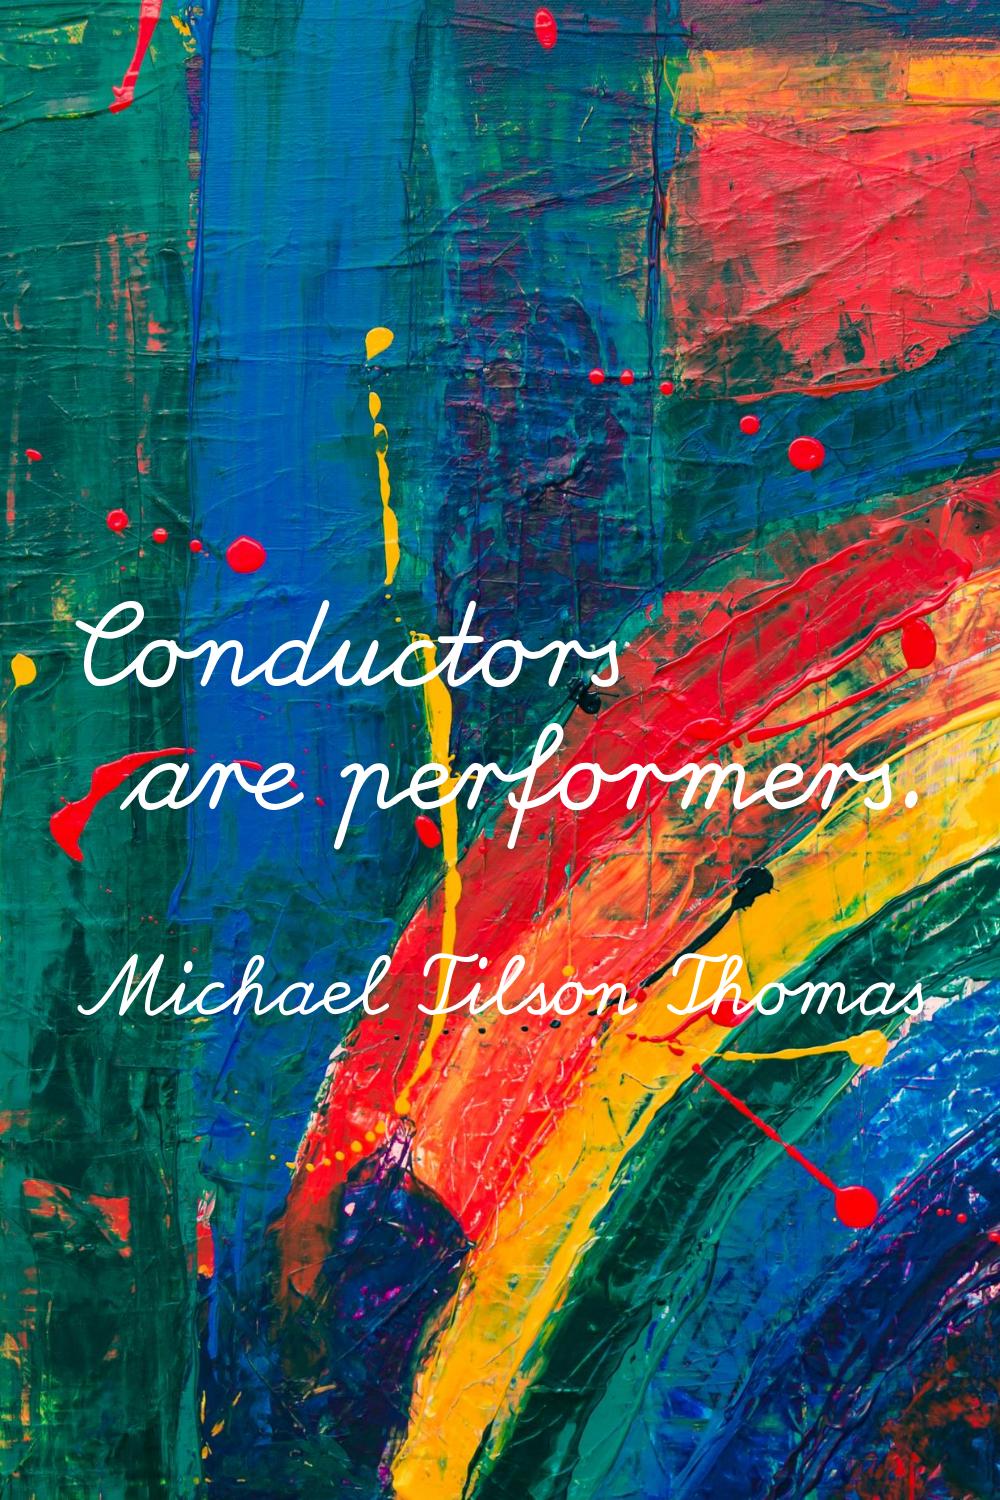 Conductors are performers.